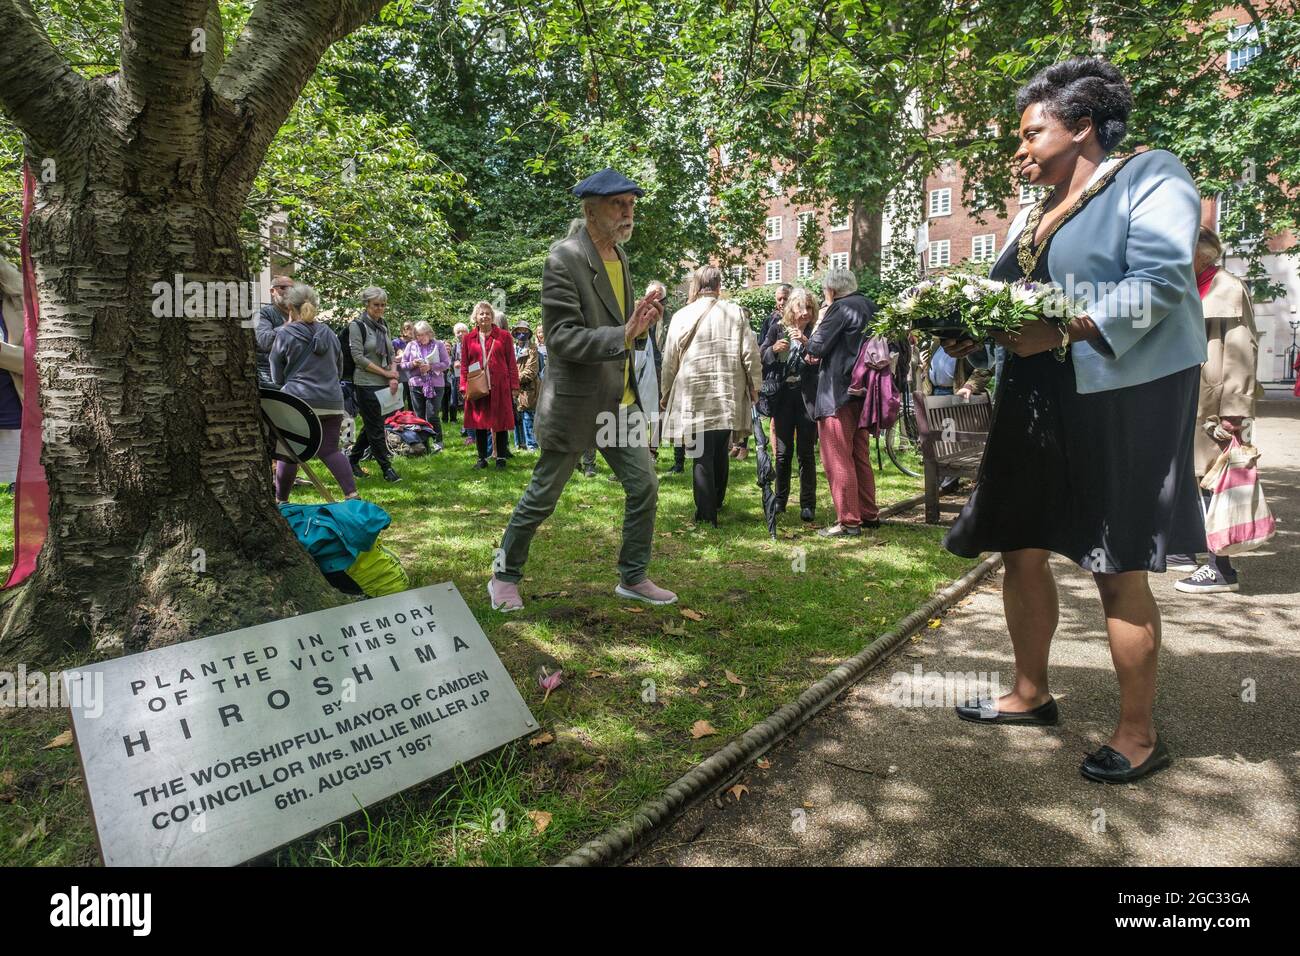 London, UK. 6th August 2021. Sabrina Francis, Mayor of Camden lays a wreath at the Hiroshima Cherry Tree. 76 years after atomic bombs were dropped on Hiroshima and Nagaski, London CND met in Tavistock Square to remember the many killed and survivors who are still suffering the event, and to celebrate the UN treaty prohibiting nuclear weapons which came into force this January. They called on the government to end the UK's nuclear weapon programme. Peter Marshall/Alamy Live News Stock Photo